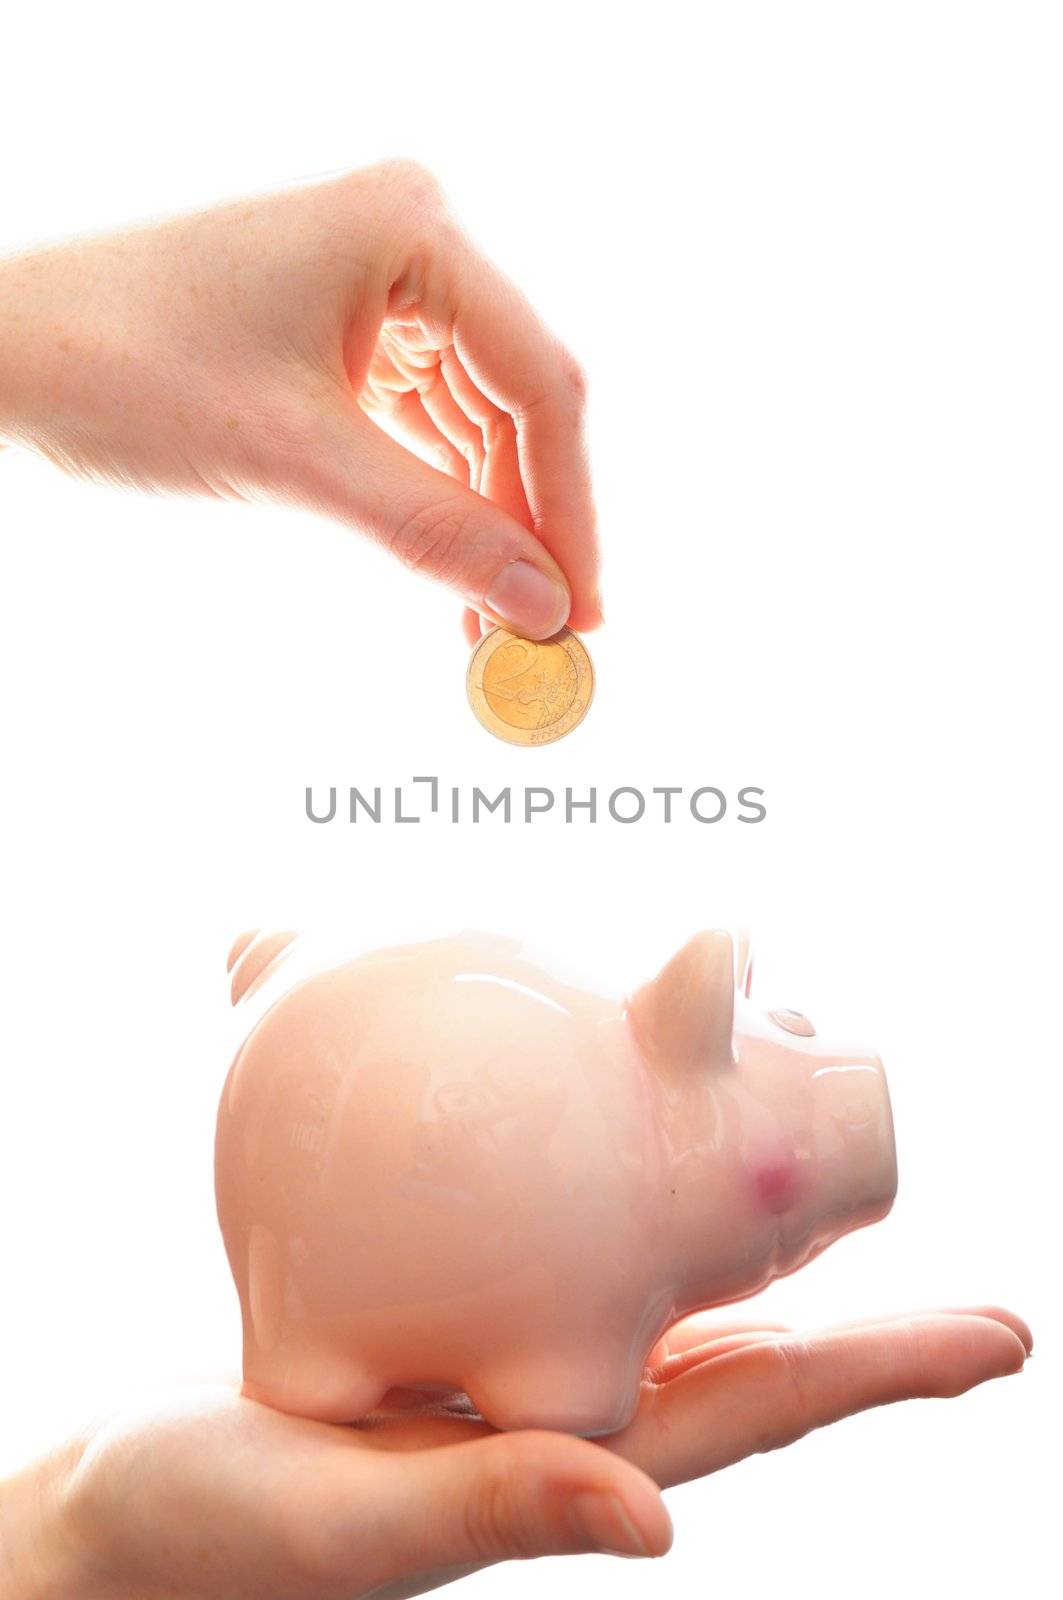 piggy bank or piggybank with hand isolated on white background showing savings concept